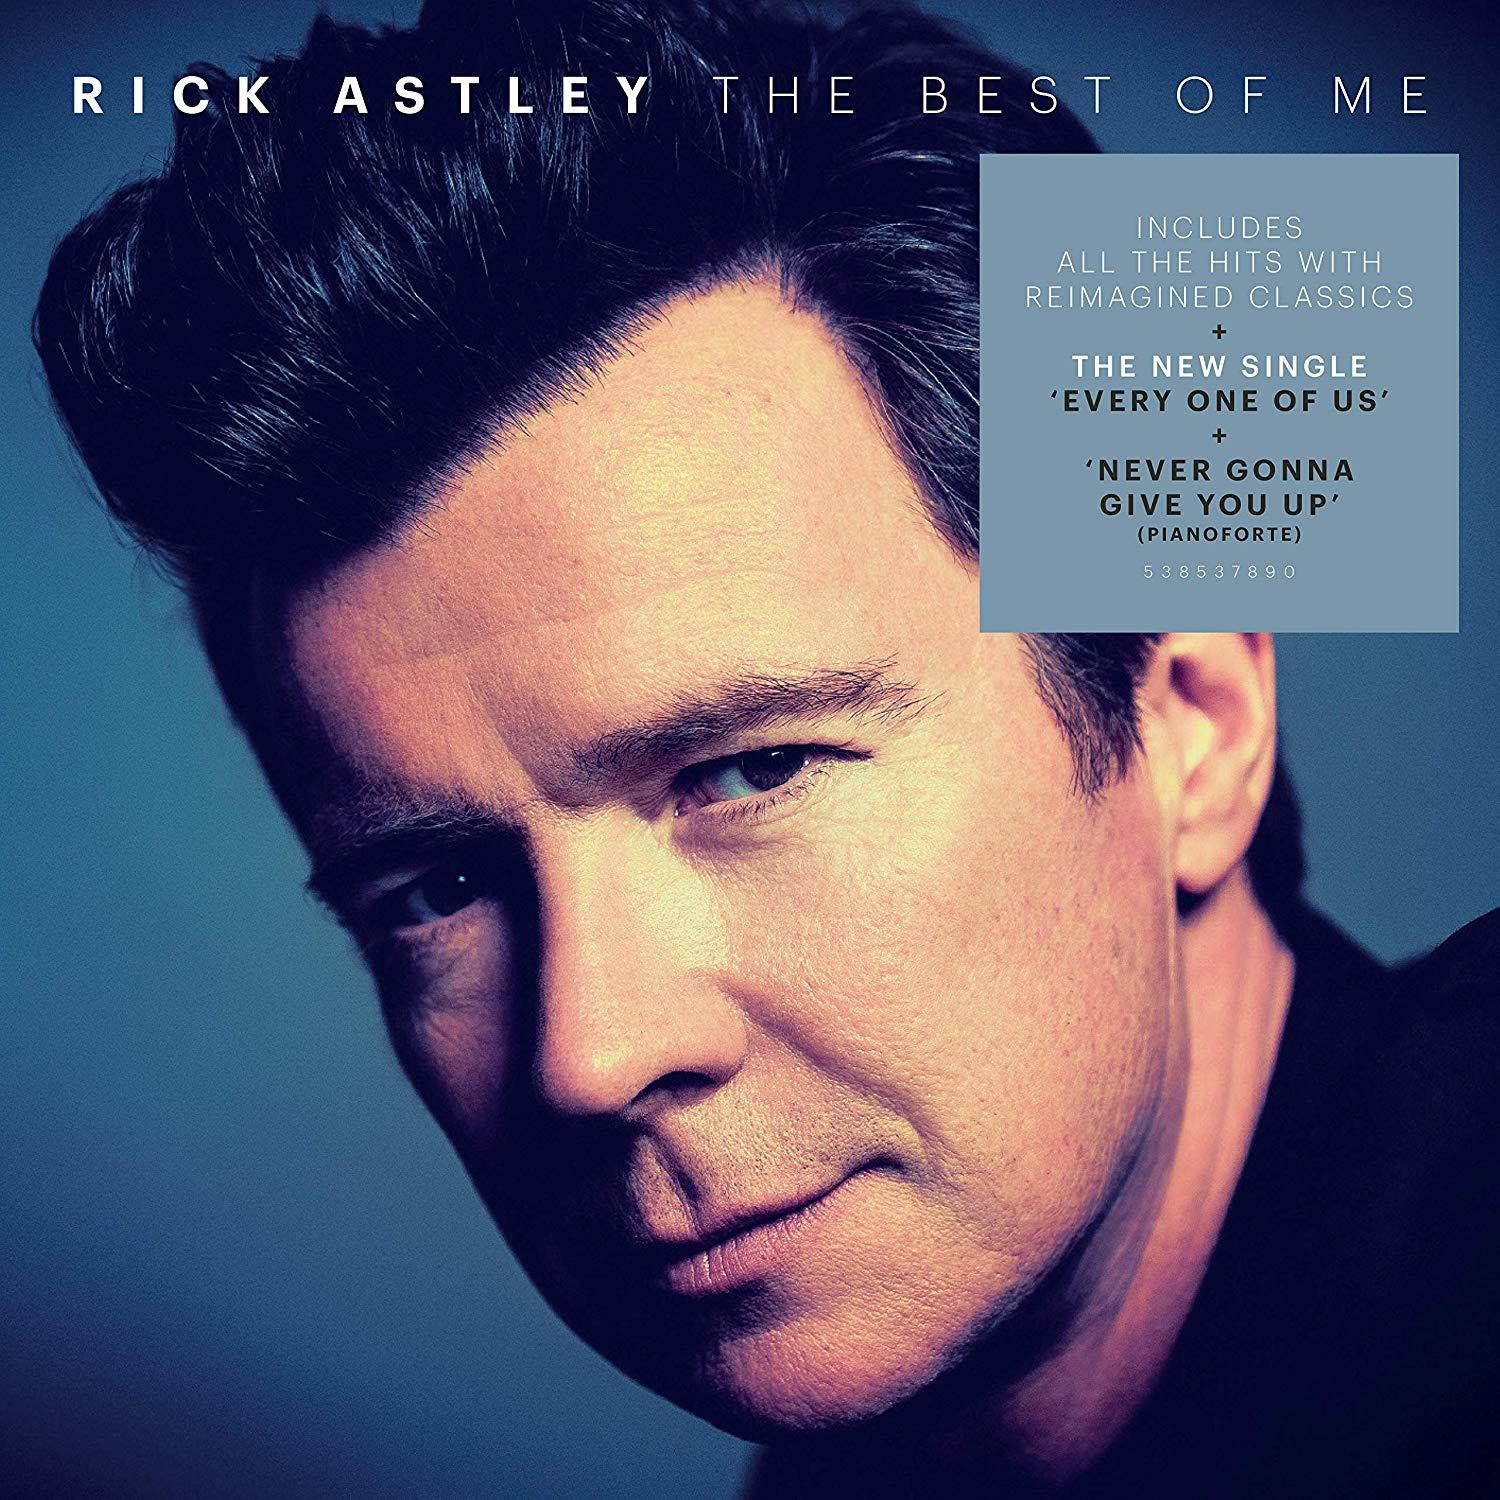 Rick Astley - The Me (CD) (Deluxe Of - Edition) Best